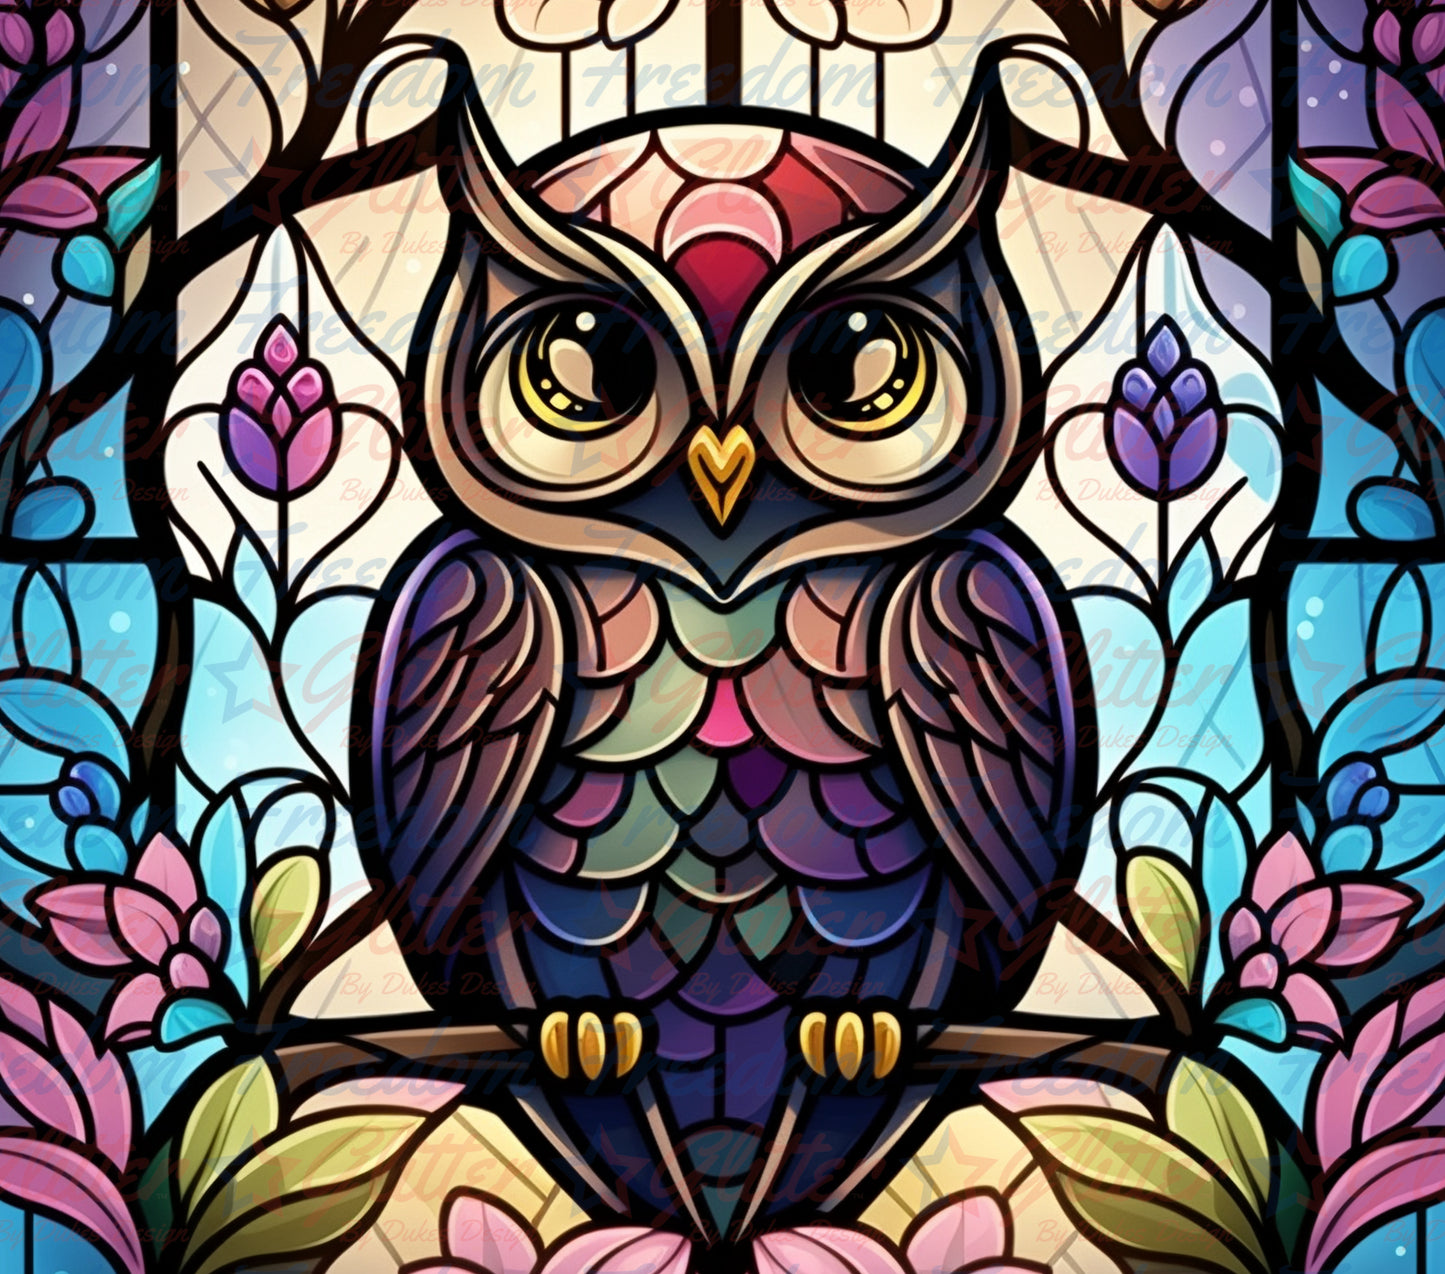 Stained Glass Owl 6 (Printed Vinyl)